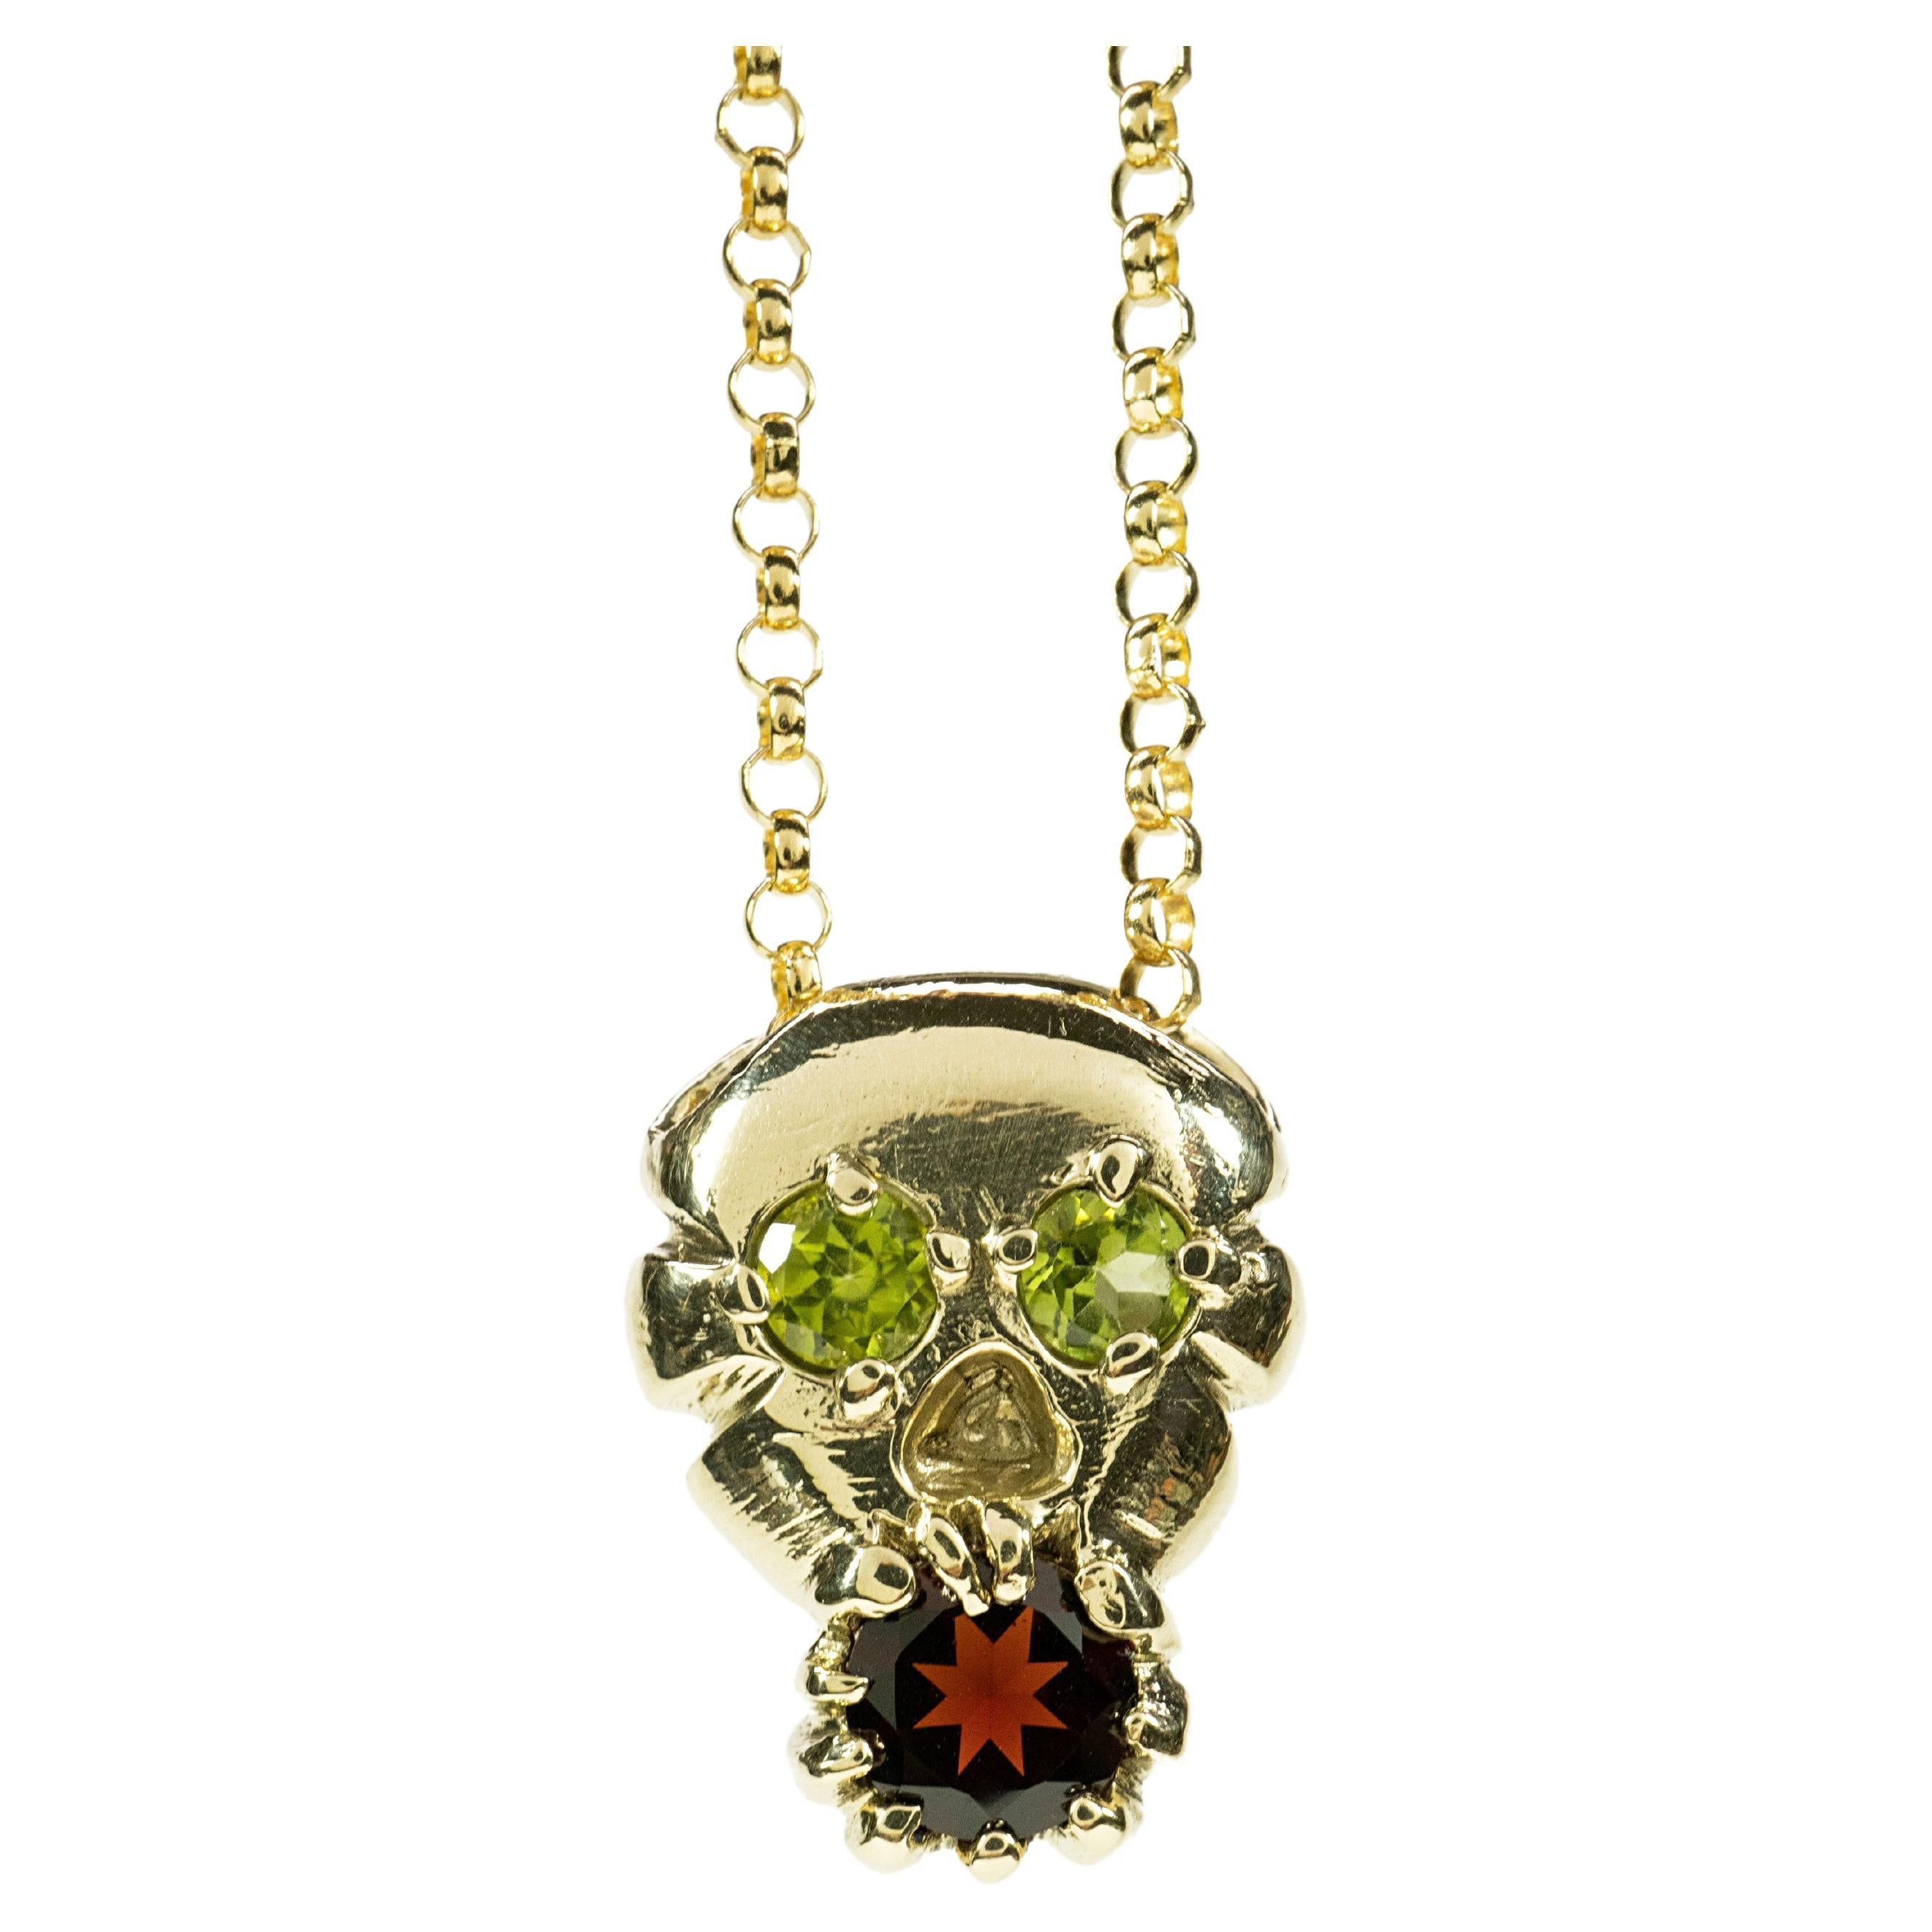 Skull and Soul (10K, Peridot, and Garnet Pendant) by Ken Fury For Sale